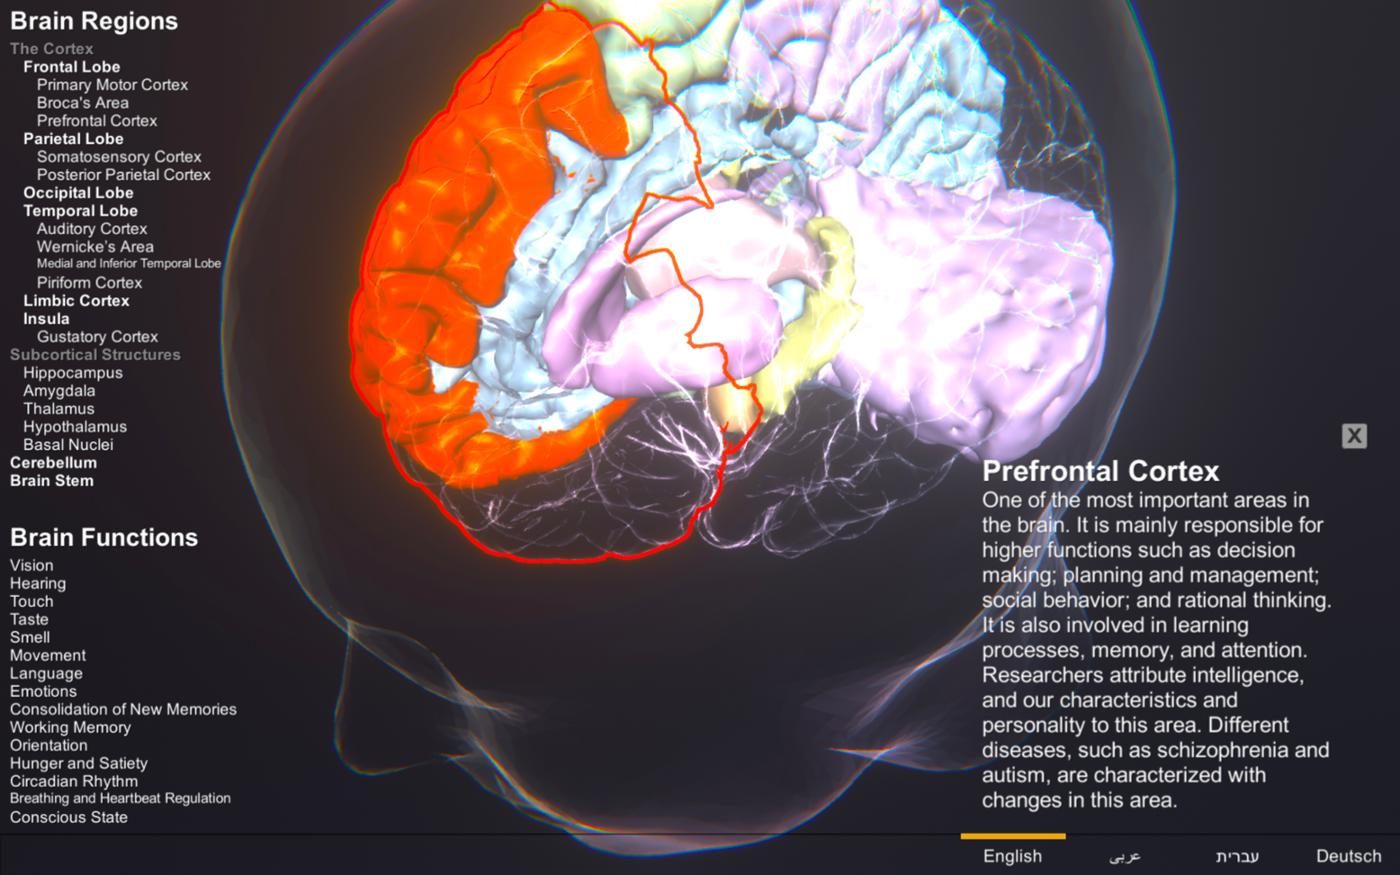 Short video of the Brain Atlas in use